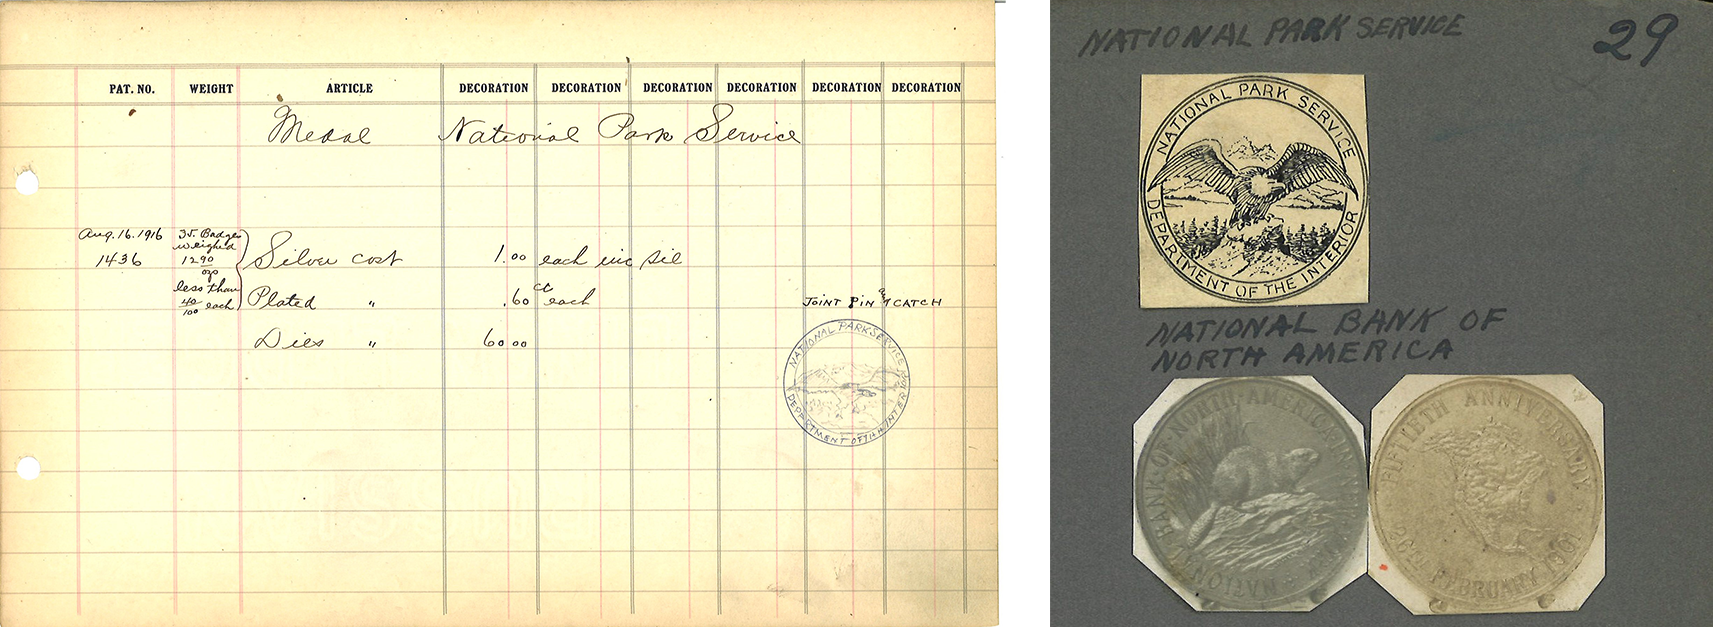 ledger page and medal design page